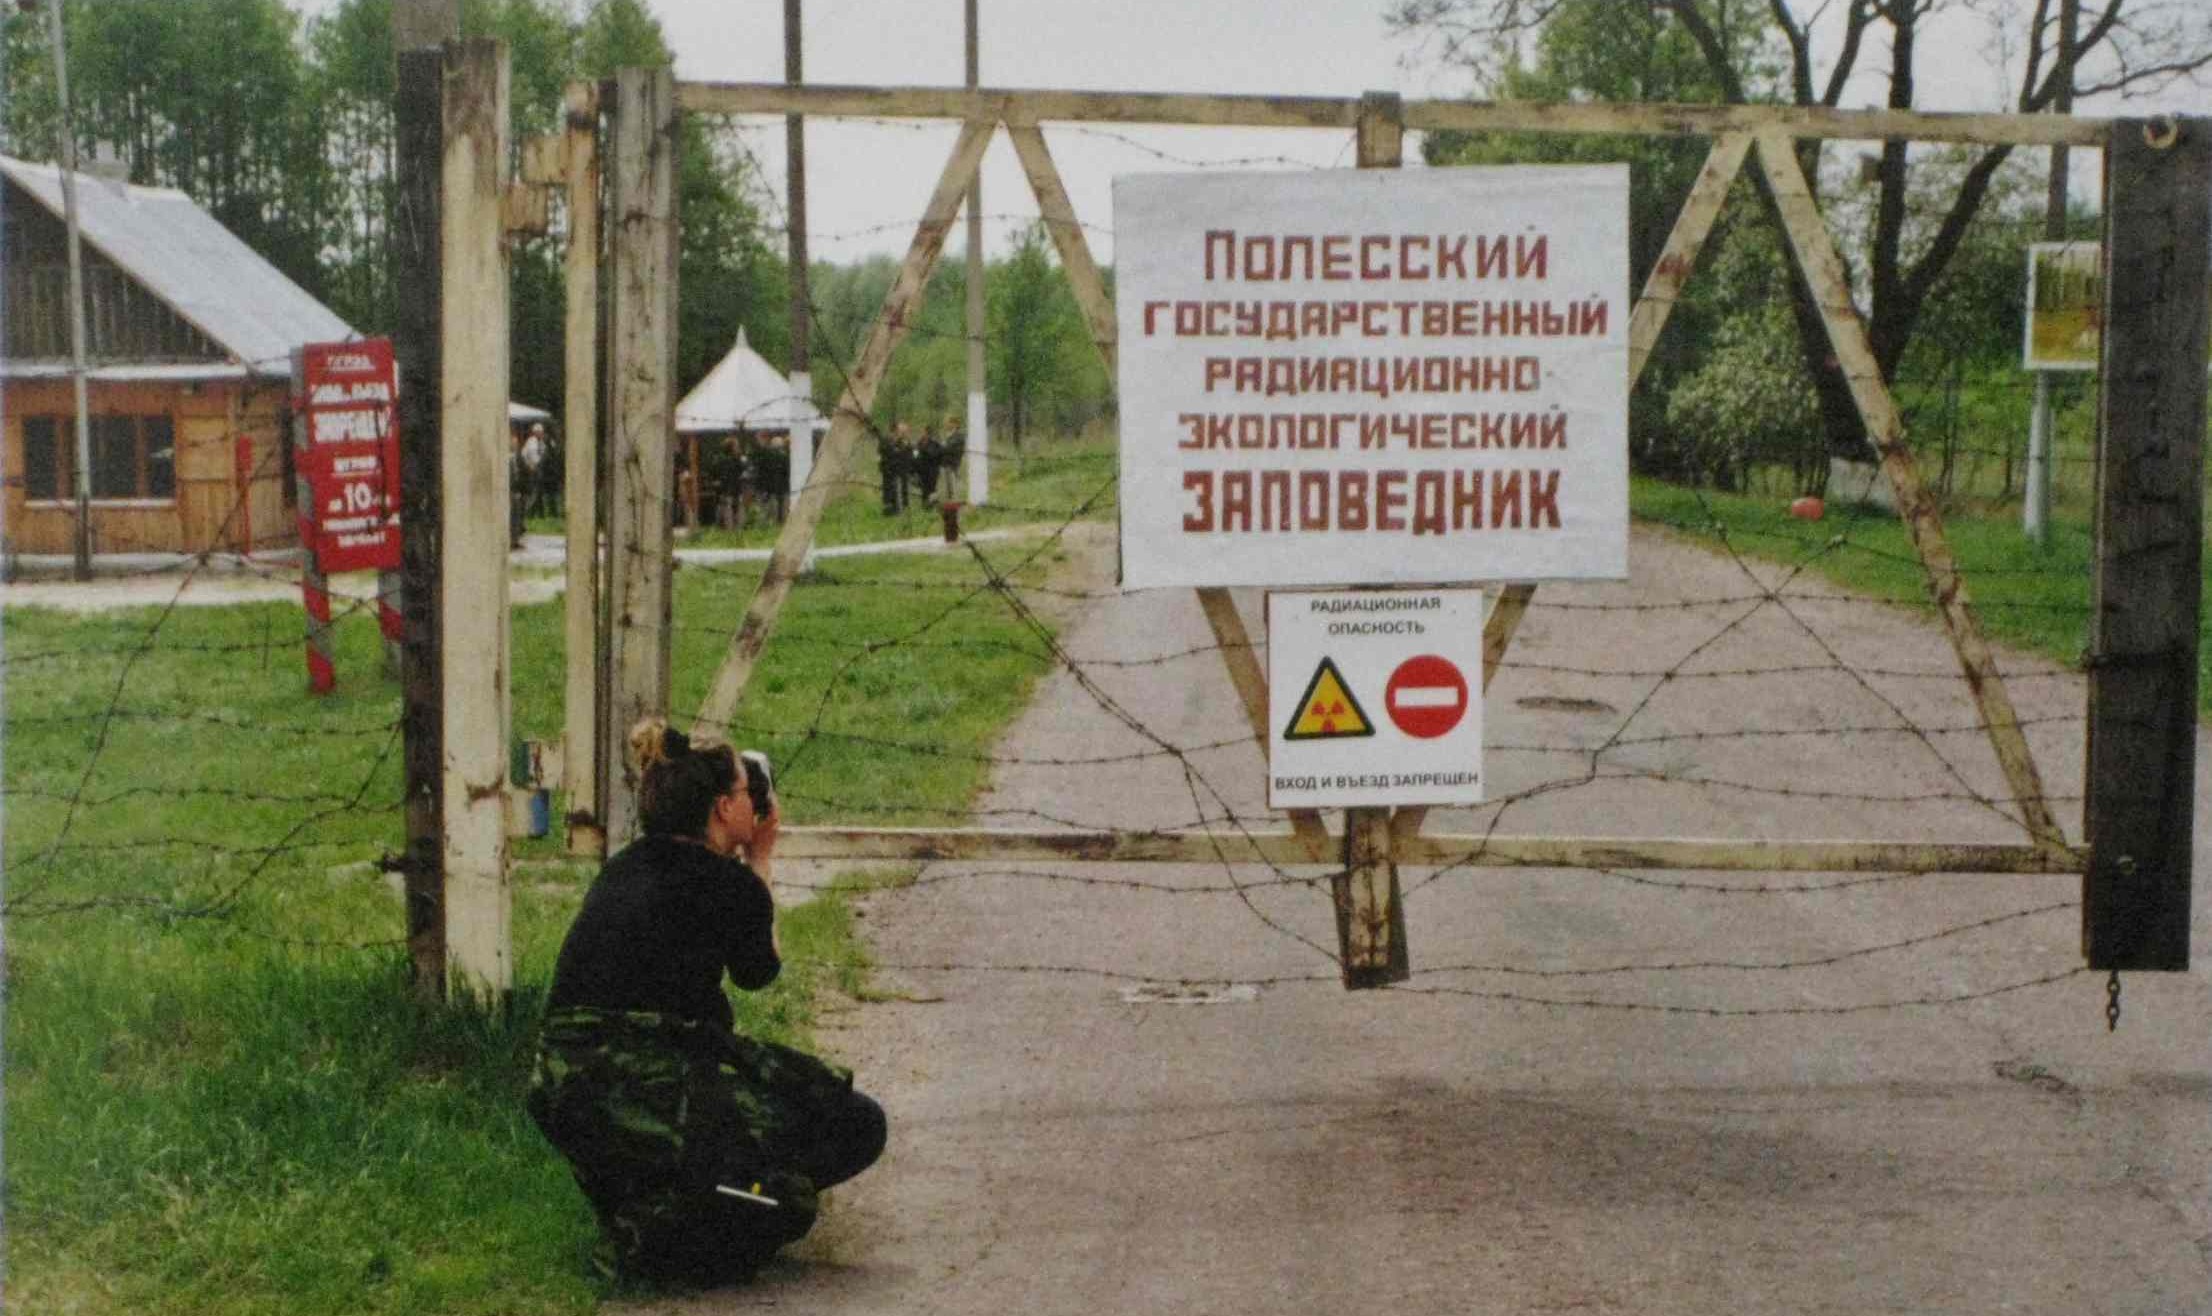 Entry to prohibited area near Chernobyl, Belorussia